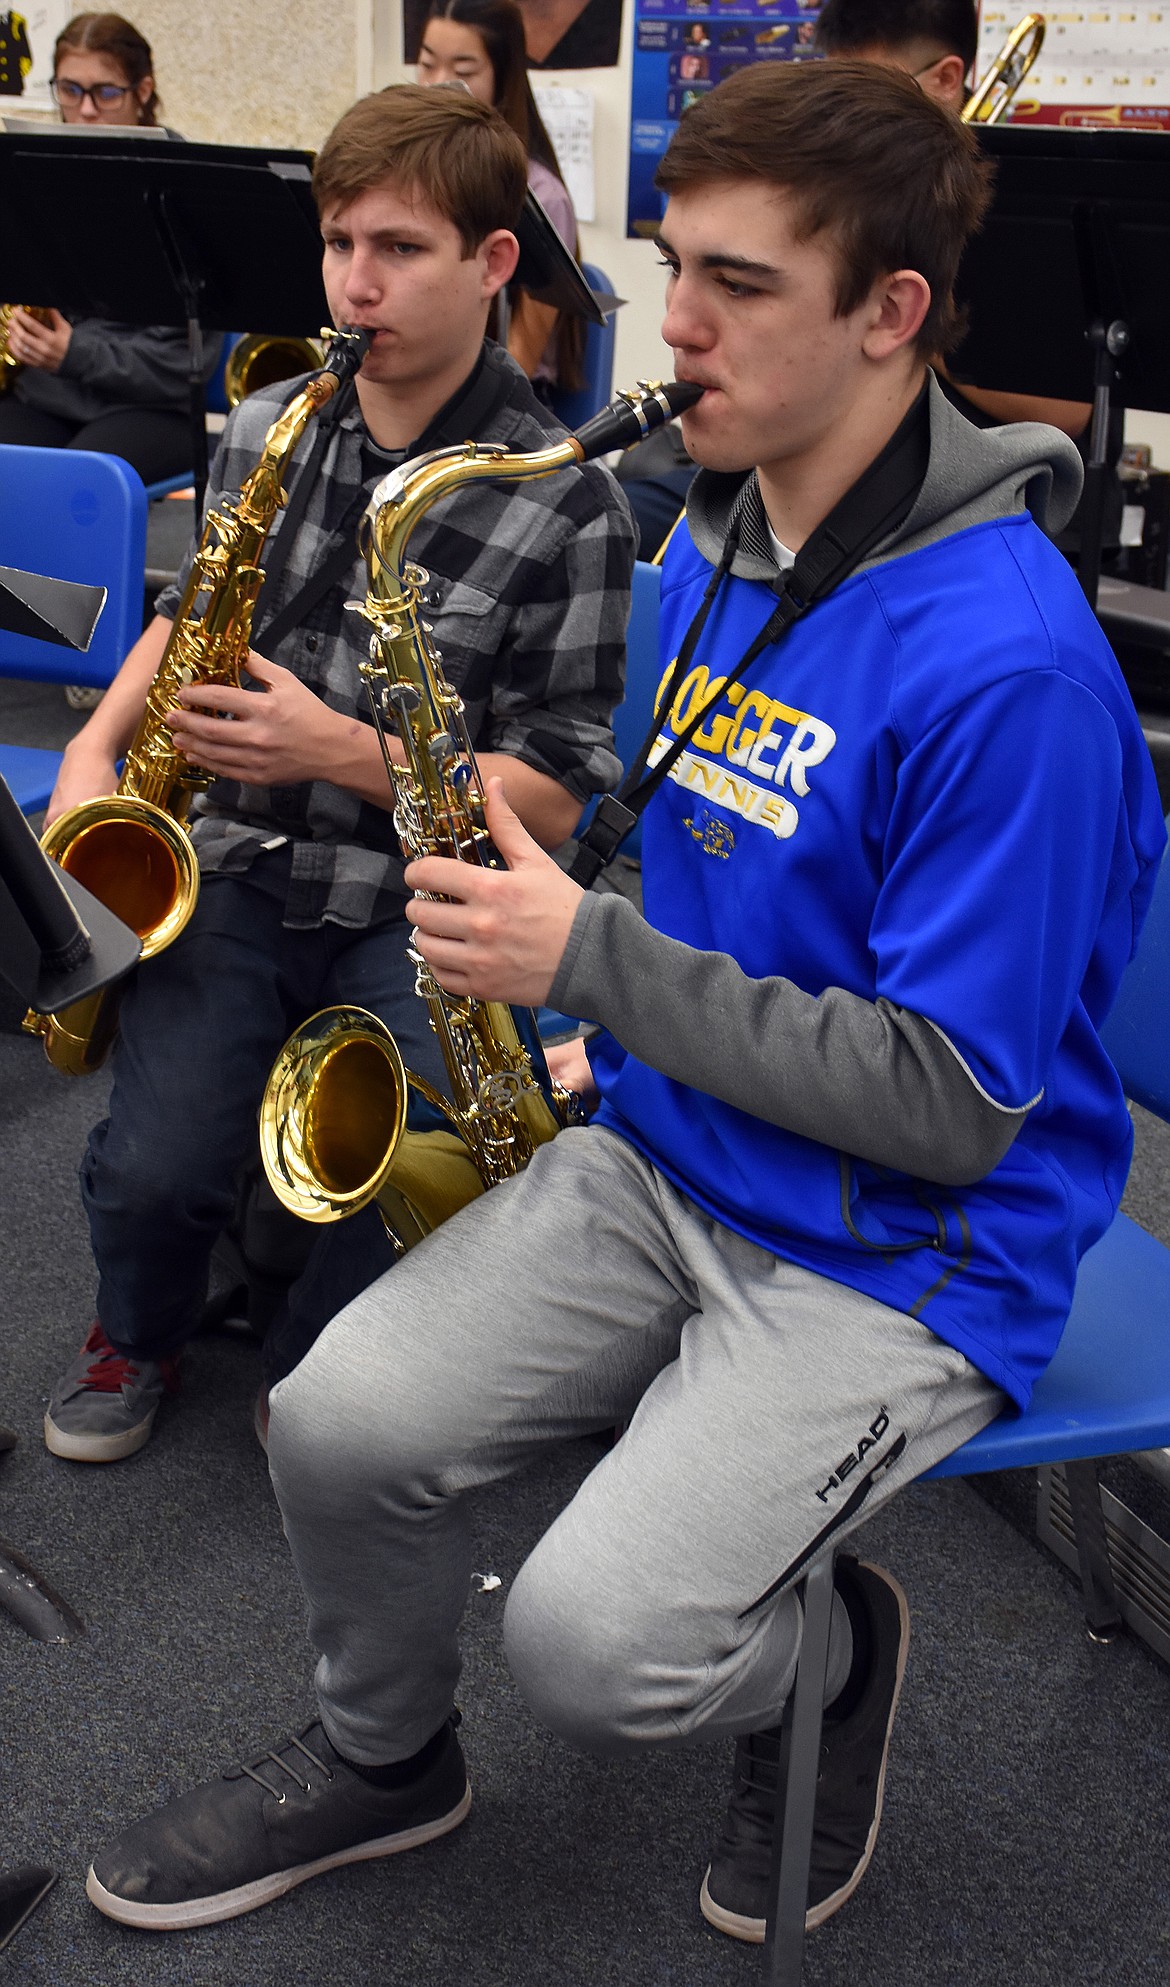 Ethan Morely, left, and Trey Thompson lead the high school band in rehearsel. (Duncan Adams/The Western News)